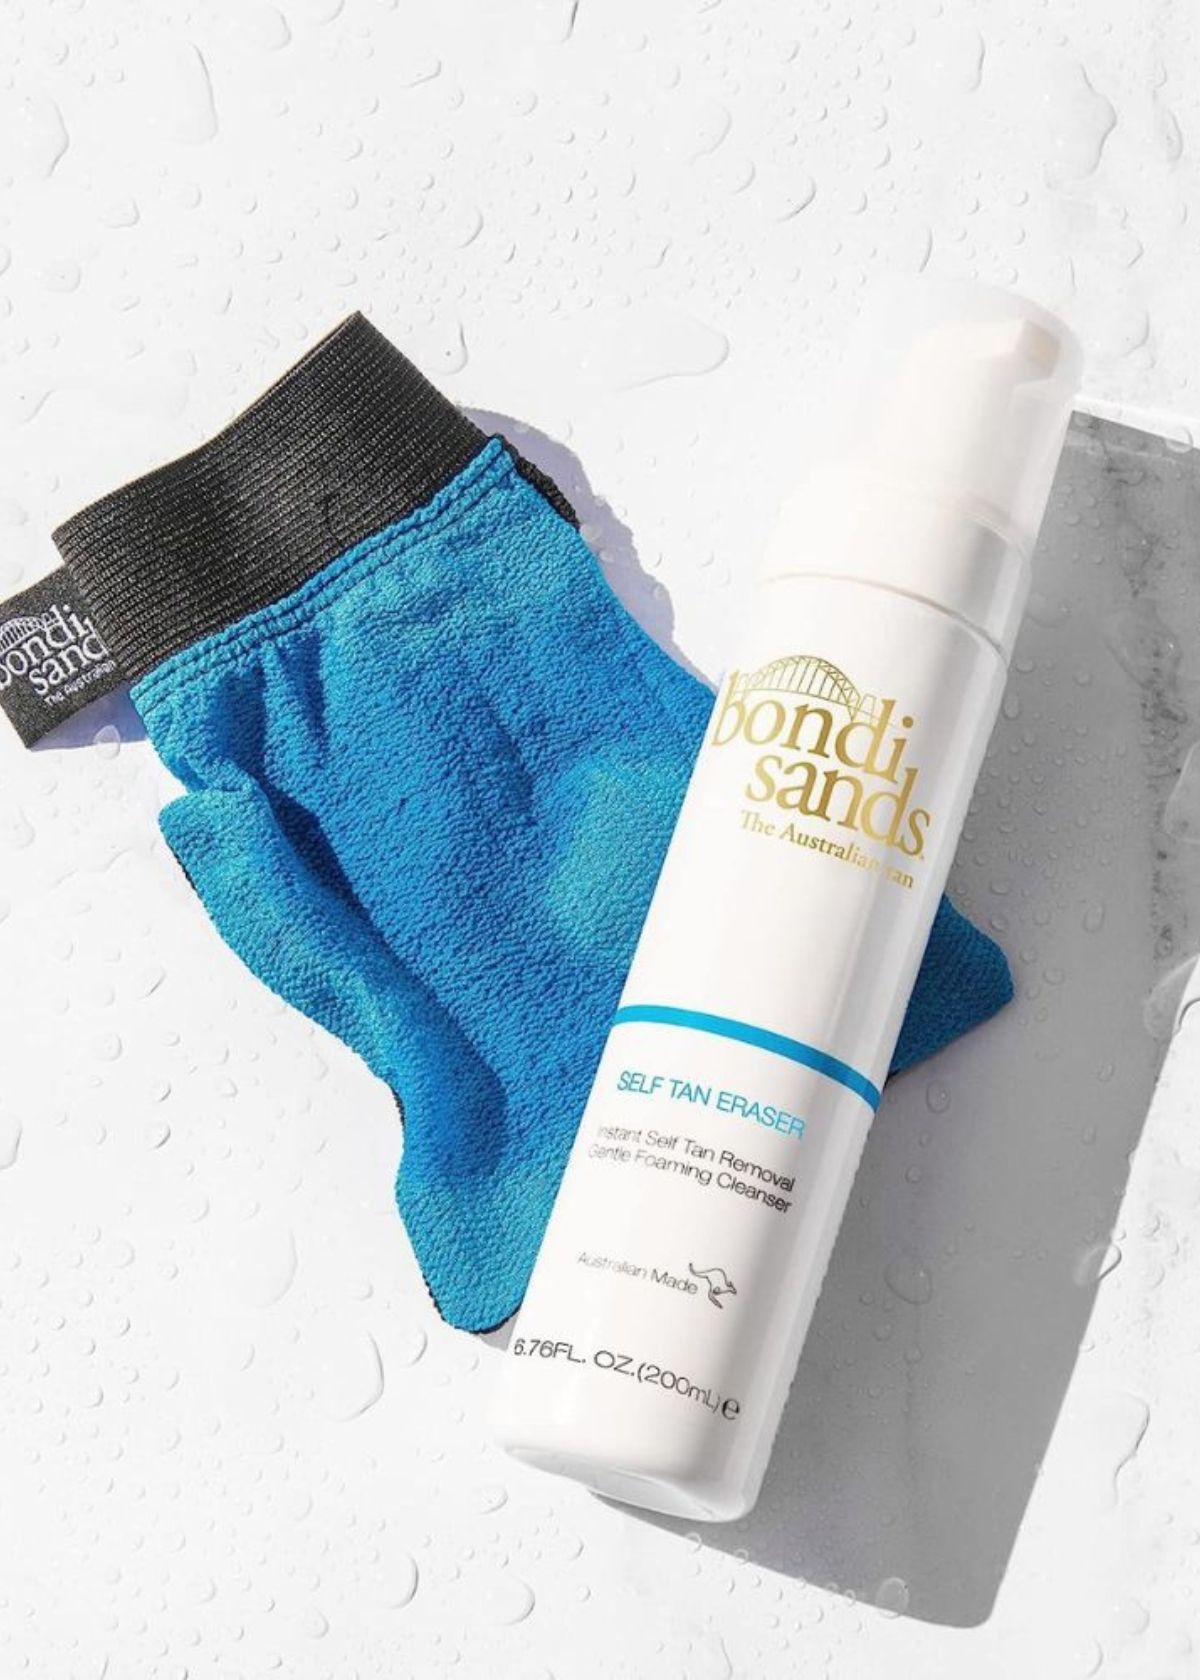 Bondi Sands Self Tan Eraser Gel Review: Your Solution to Self-Tanning Mistakes